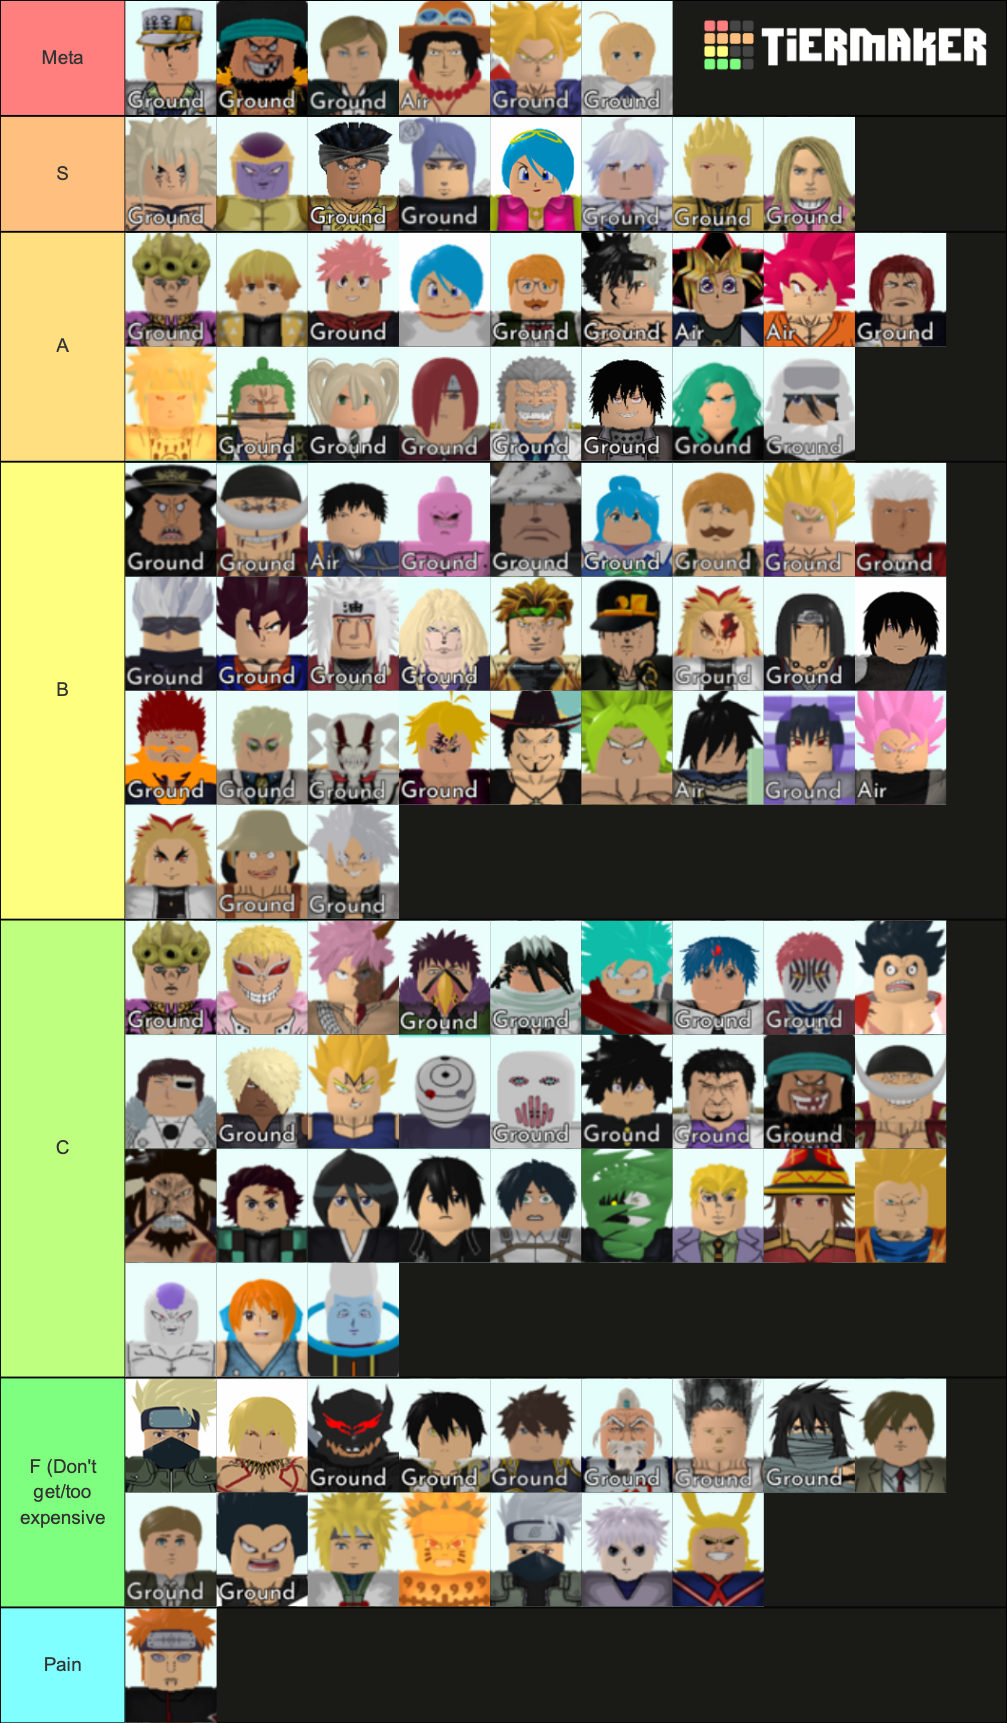 Roblox All Star Tower Defense 6 and 7* Tier List (Community Rankings) -  TierMaker